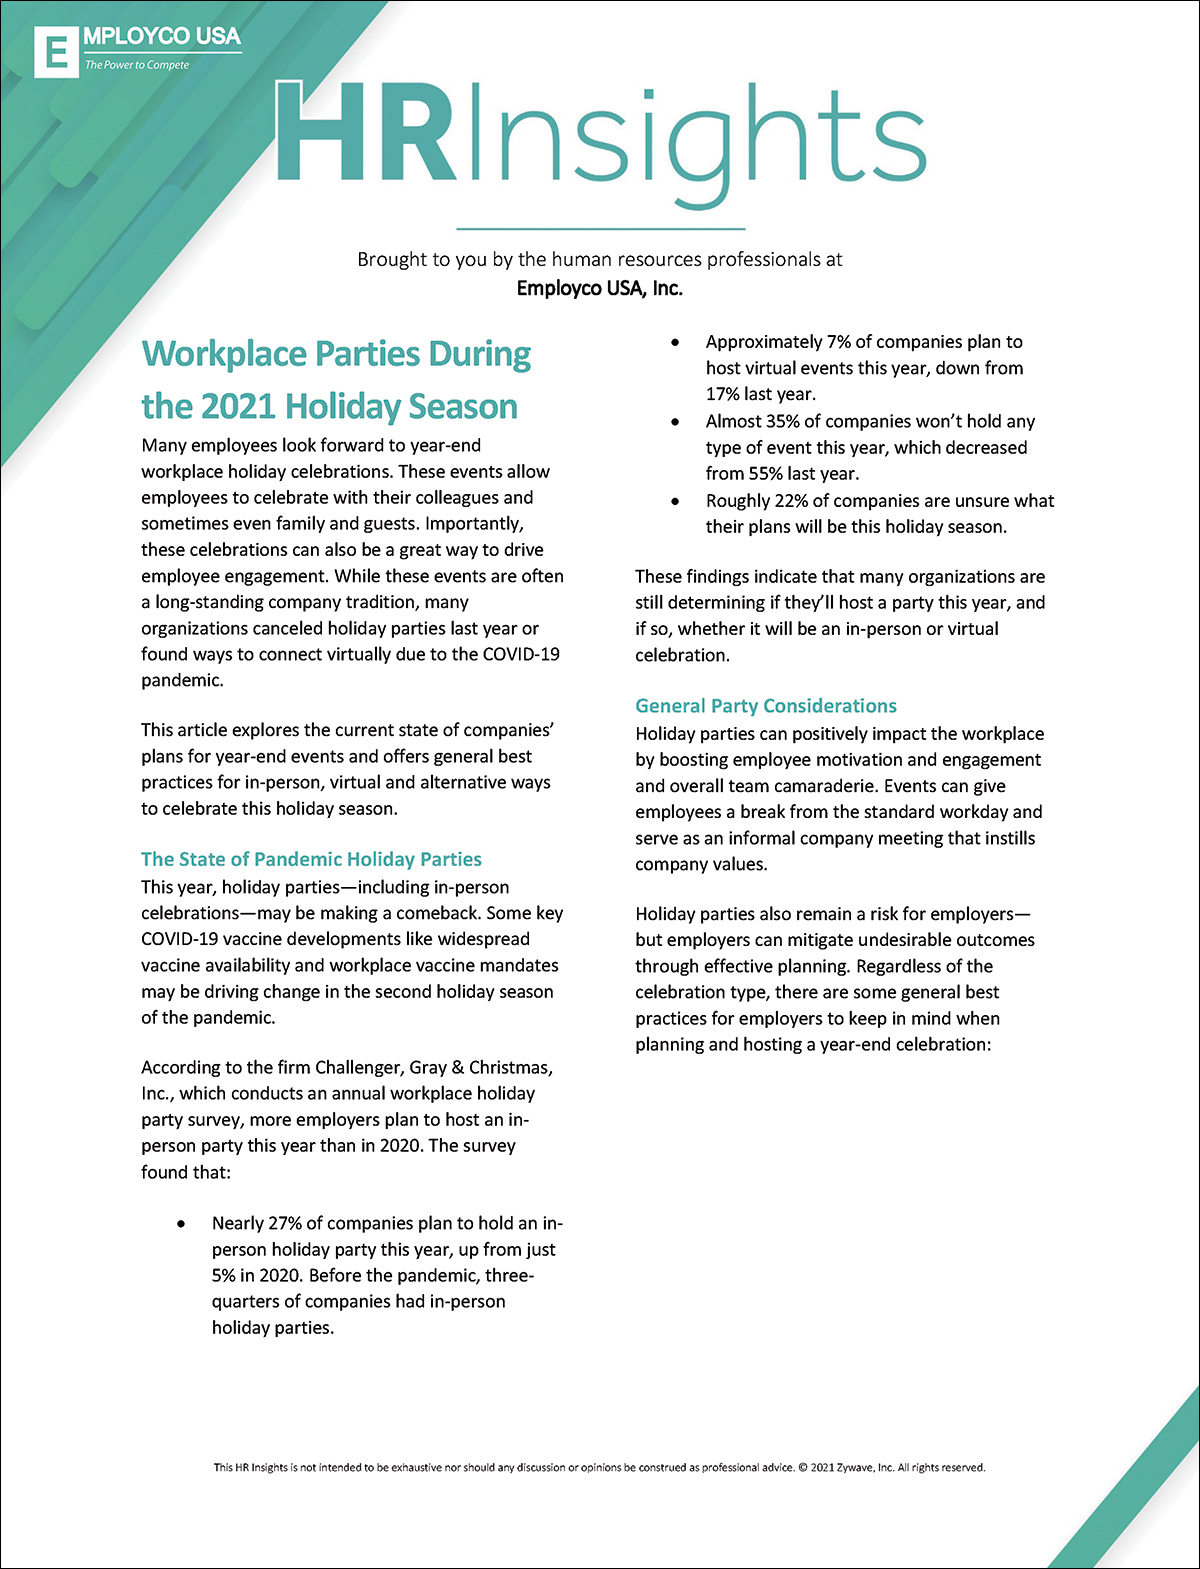 HR Insights: Workplace Parties During the 2021 Holiday Season